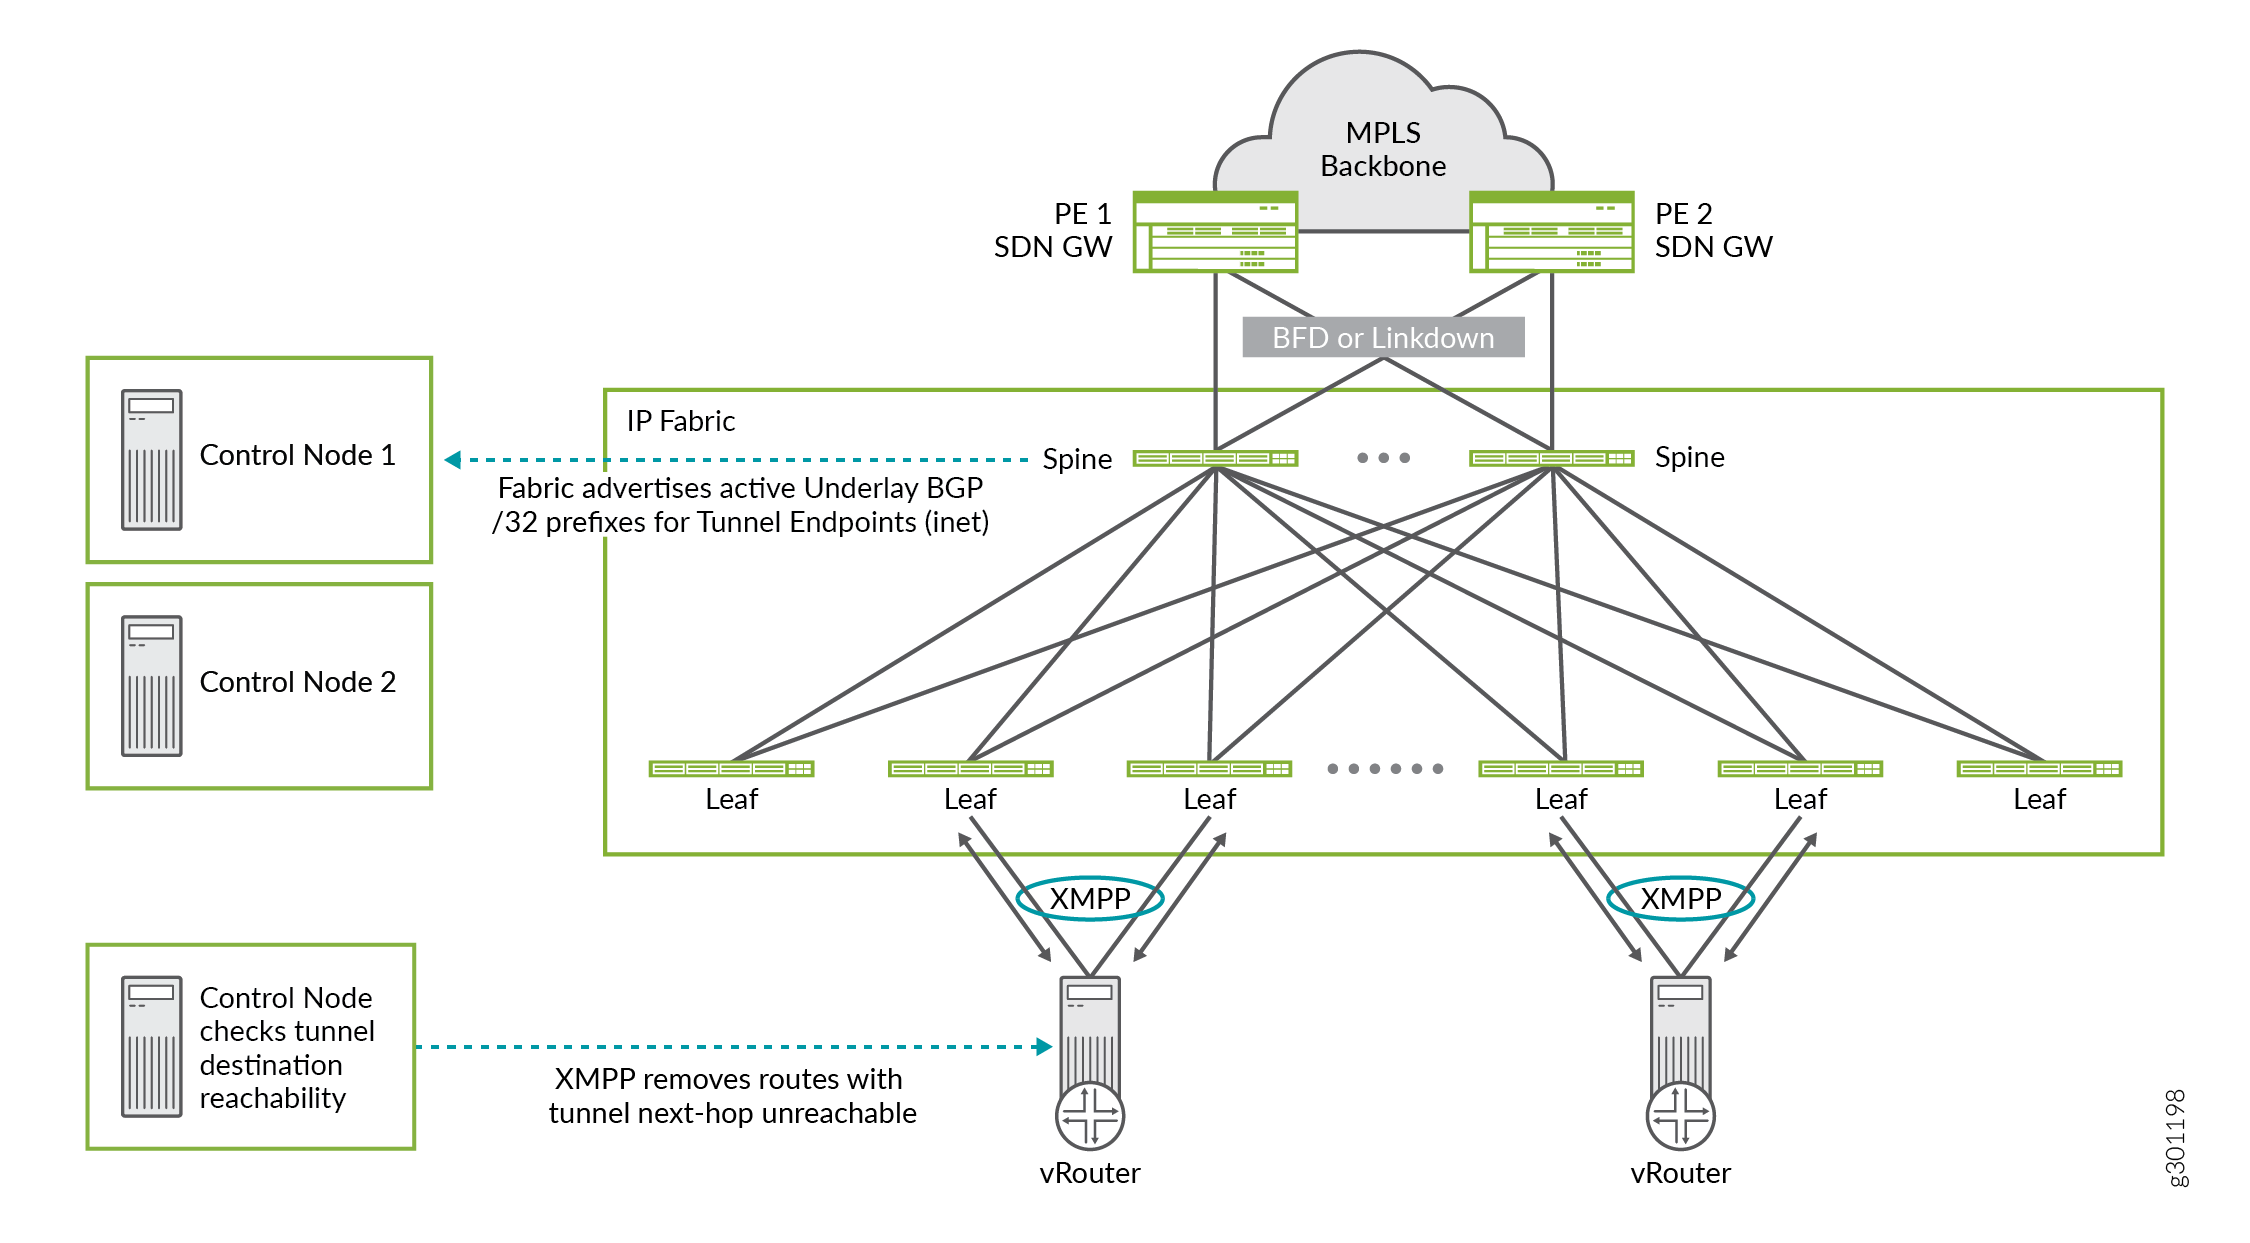 Fast Convergence in a Contrail Managed Network